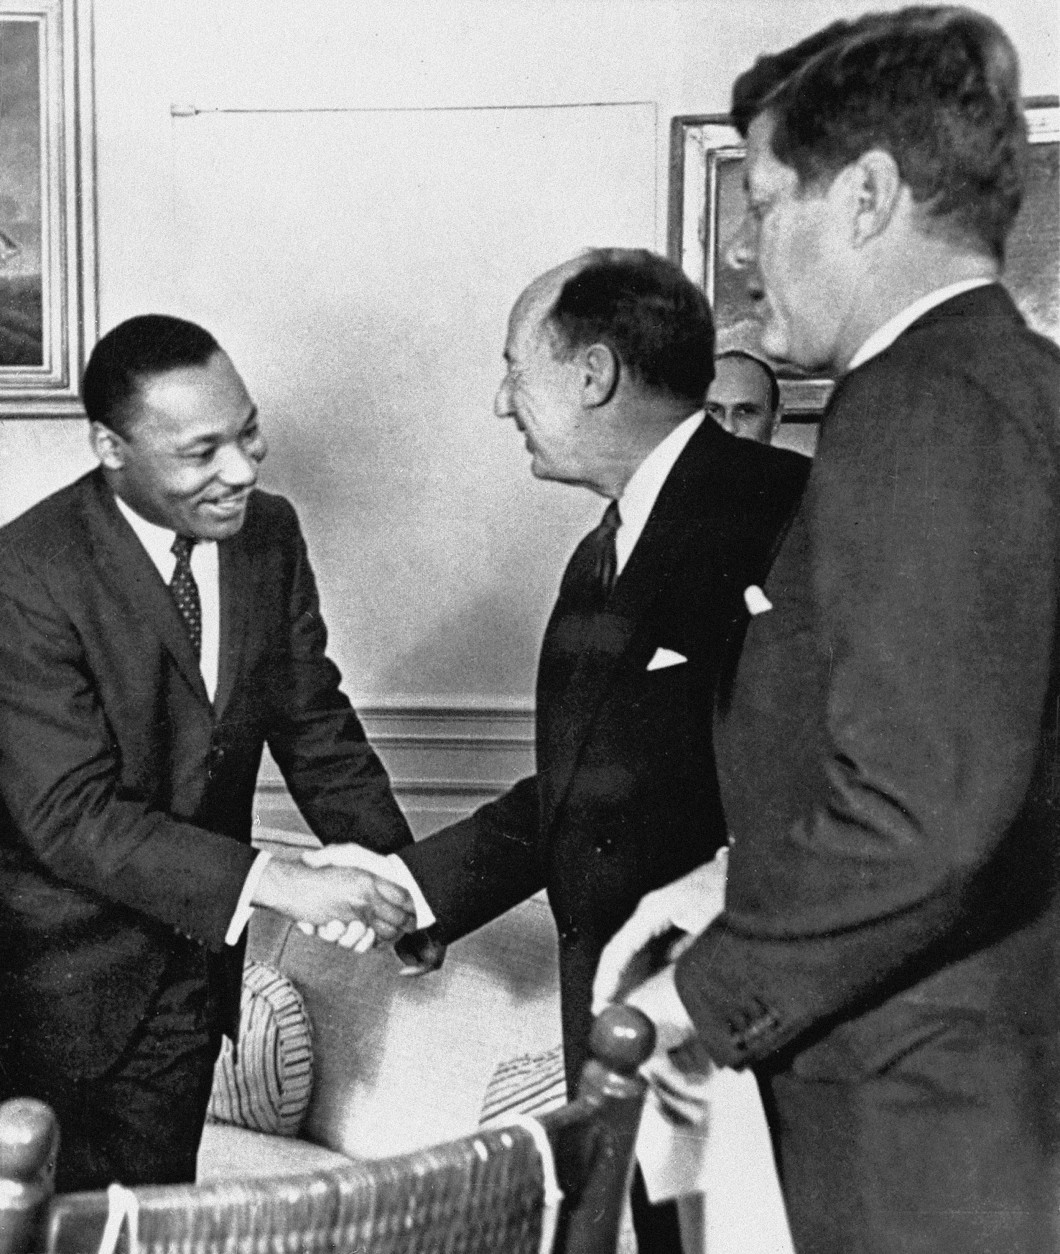 Ambassador Adlai Stevenson, the U.S. delegate to the United Nations, shakes hands with Martin Luther King Jr., president of the Southern Christian Leadership Conference, Atlanta, Ga., at the White House in Washington with President John F. Kennedy at right. The meeting occurred as Kennedy met with members of the American Negro Leadership Conference on Africa. Historians generally agree that Kennedy's phone call to Coretta Scott King expressing concern over her husband's arrest in October 1960, and Robert Kennedy's work behind the scenes to get King released, helped JFK win the White House that fall. King himself, while appreciative, wasn't as quick to credit the Kennedys alone with getting him out of jail, according to a previously unreleased portion of the interview with the civil rights leader days after Kennedy's election. (AP Photo, File)